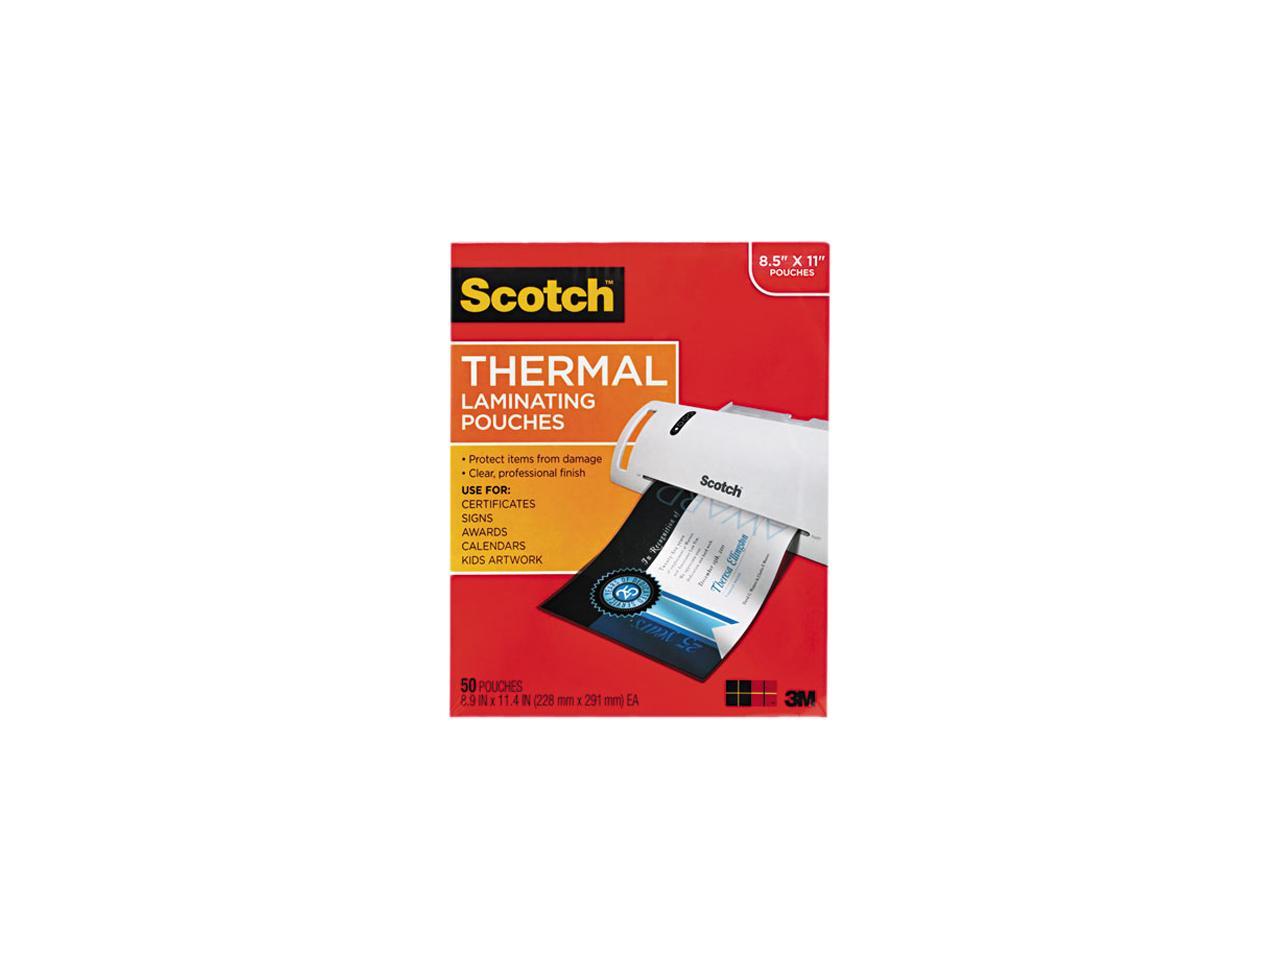 3m Scotch Tp3854 50 85 X 11 Letter Size Thermal Laminating Pouches 3 Mil 50pack 